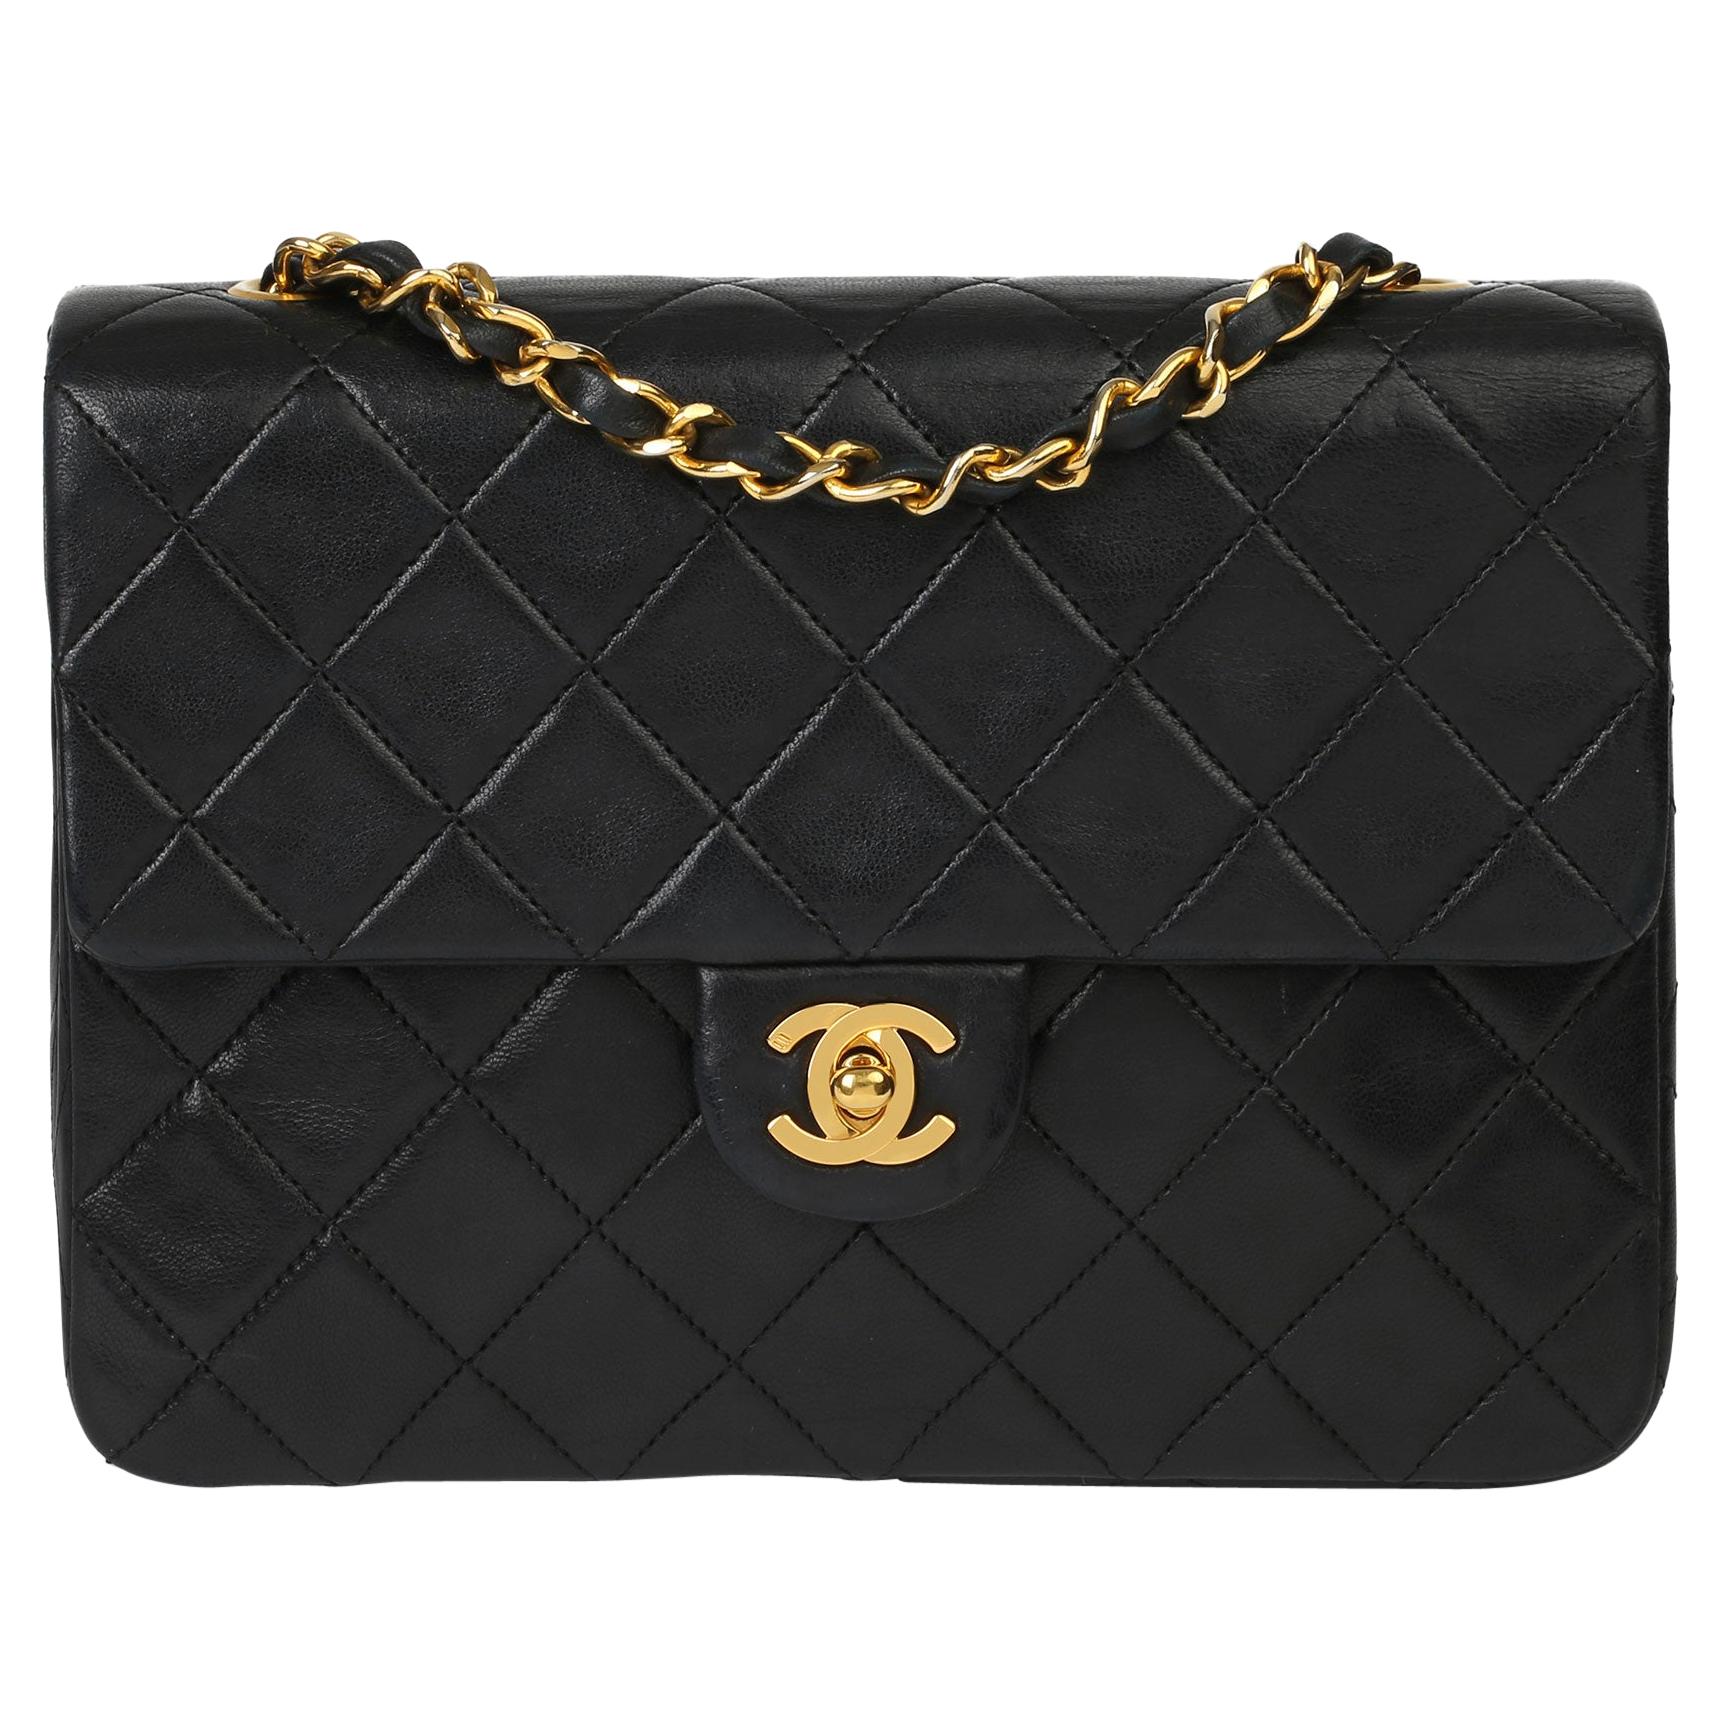 1996 Chanel Black Quilted Lambskin Mini Flap Bag 